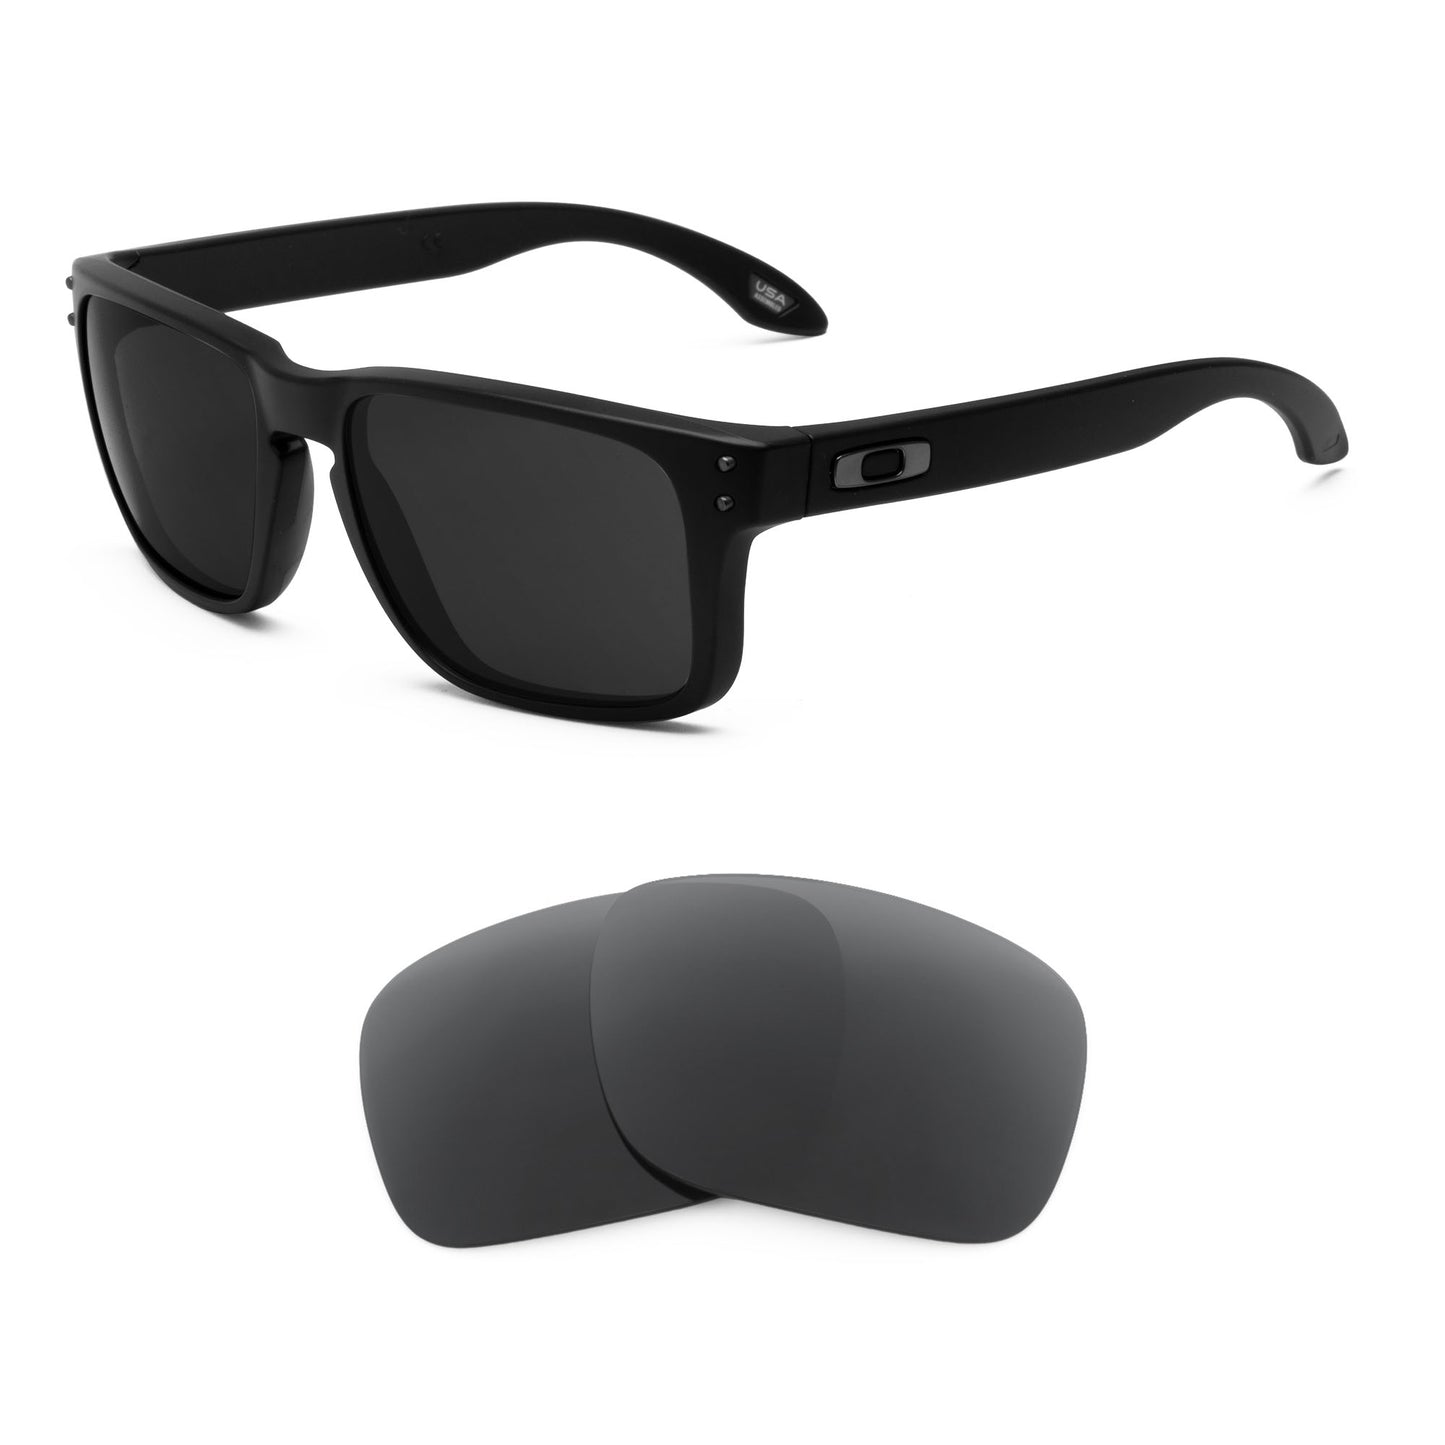 Oakley Holbrook XS sunglasses with replacement lenses